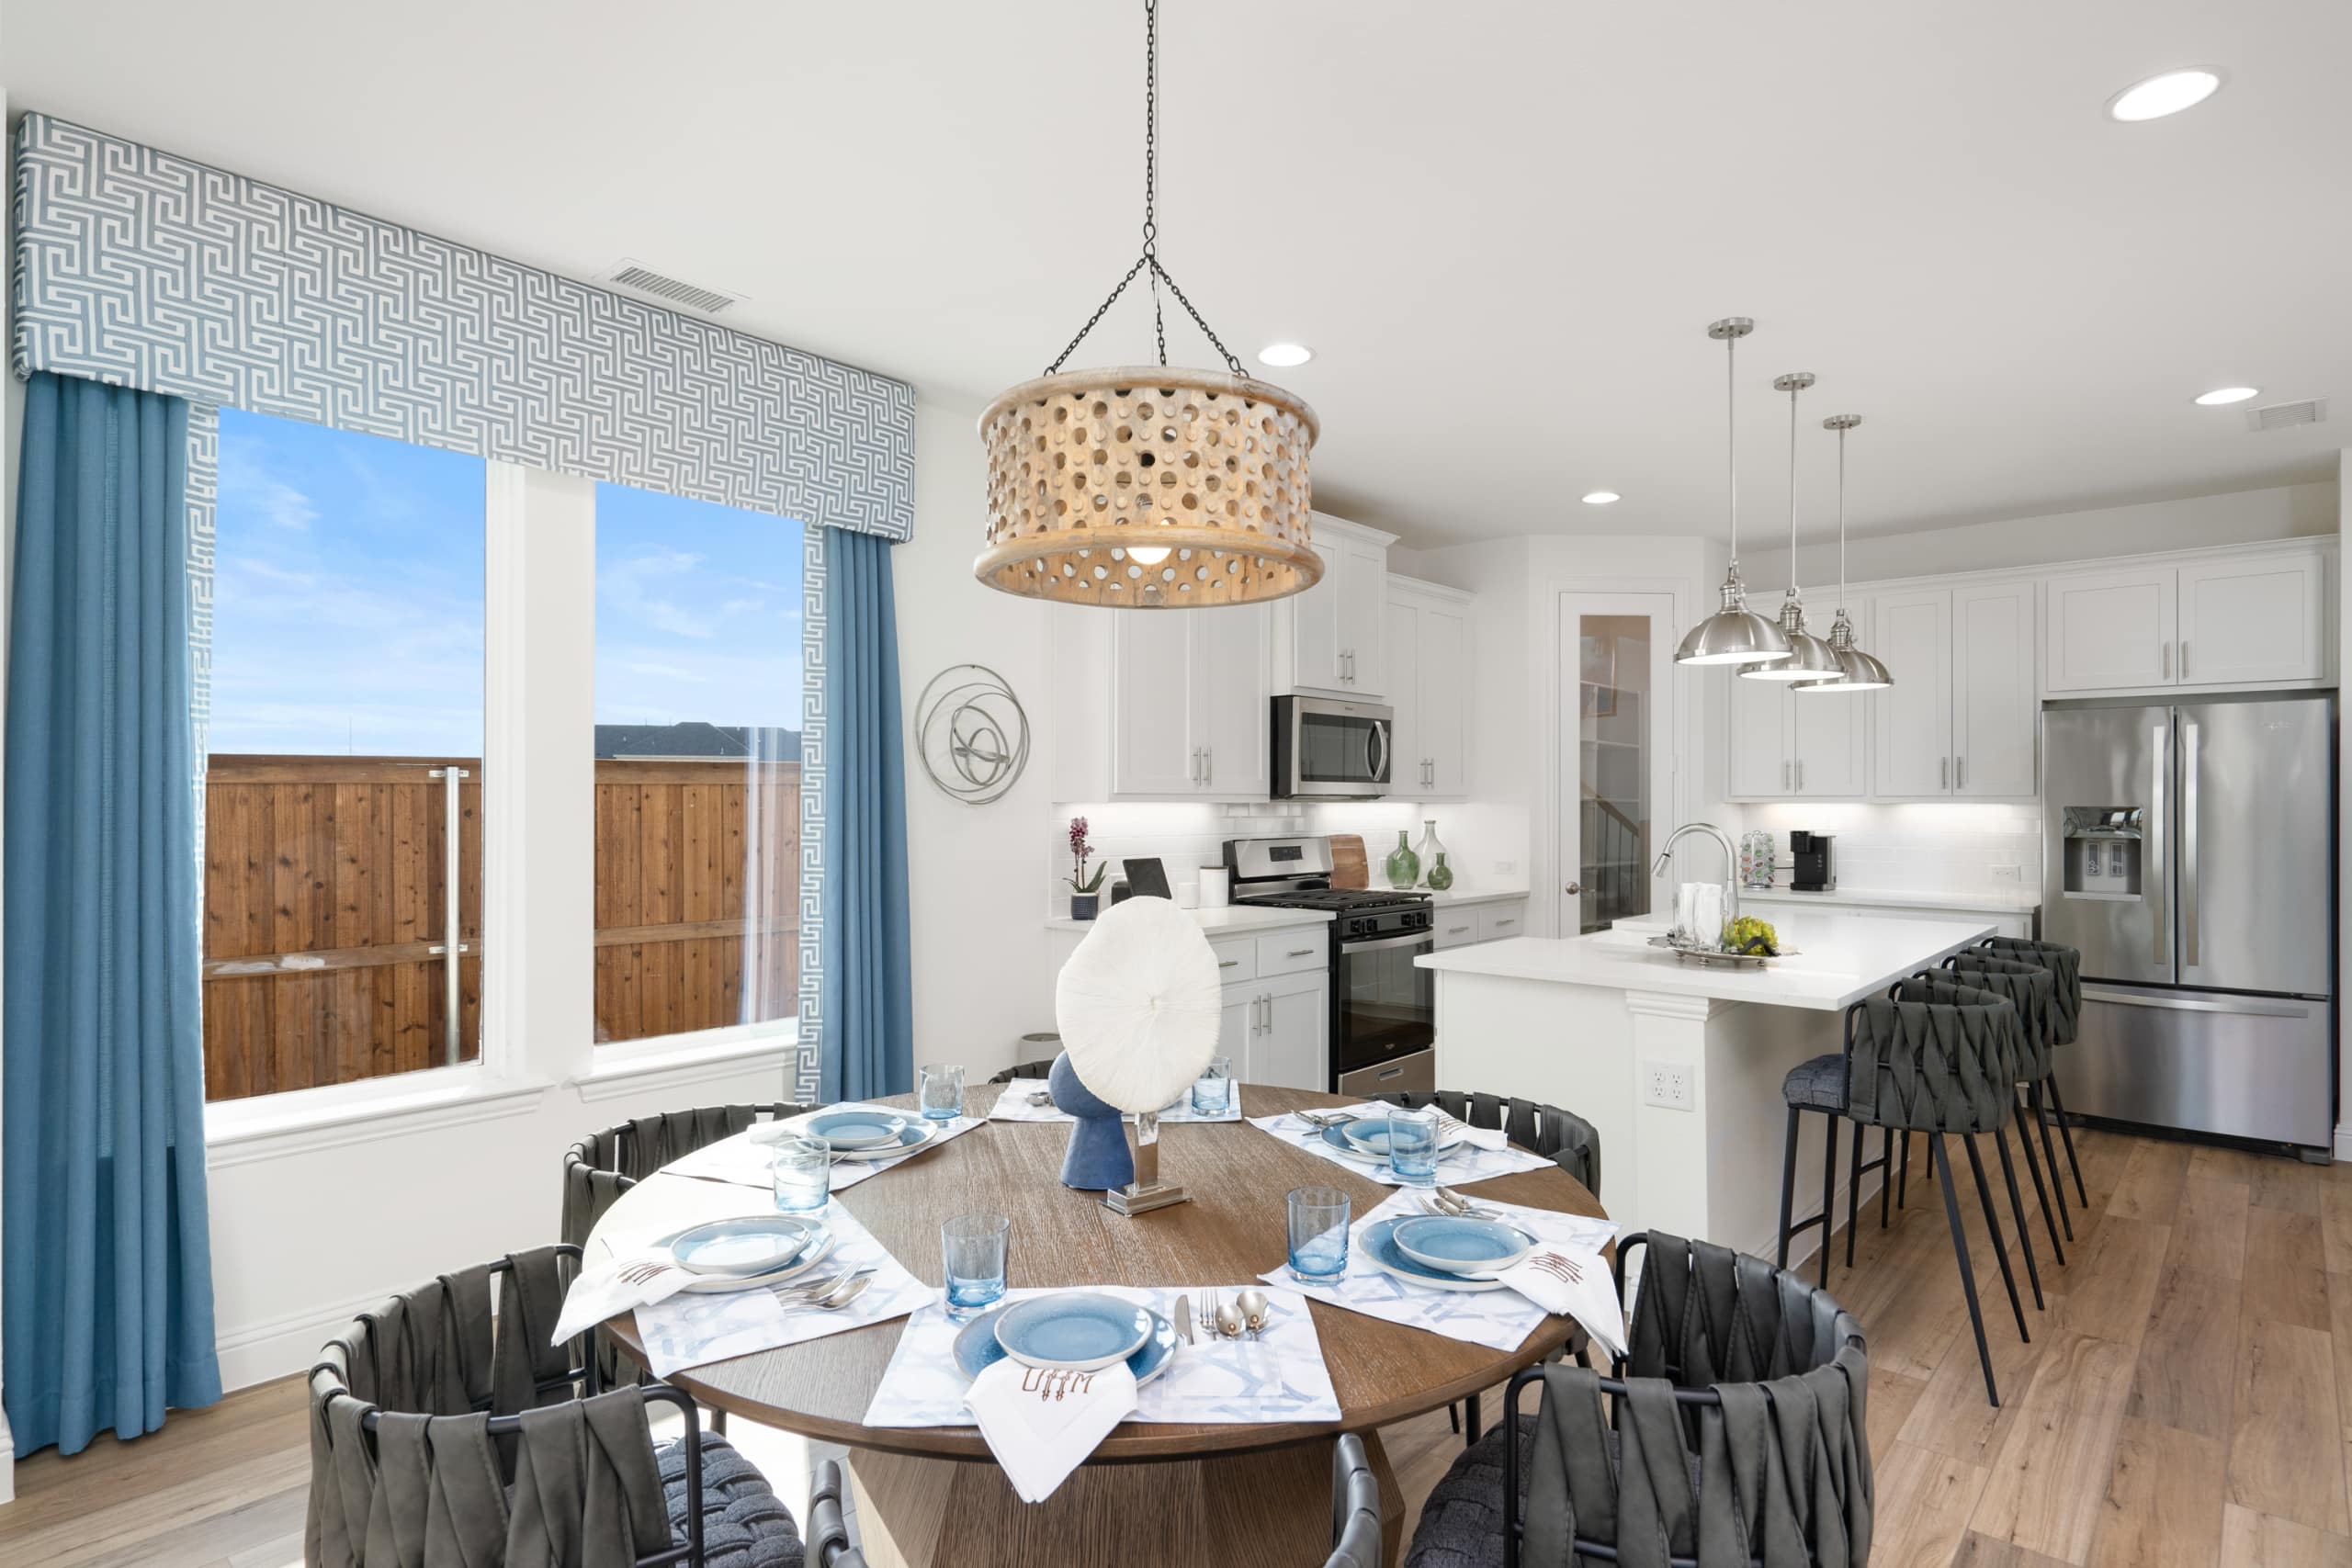 A kitchen and dining room with blue curtains, featuring a UnionMain Homes Promotion.